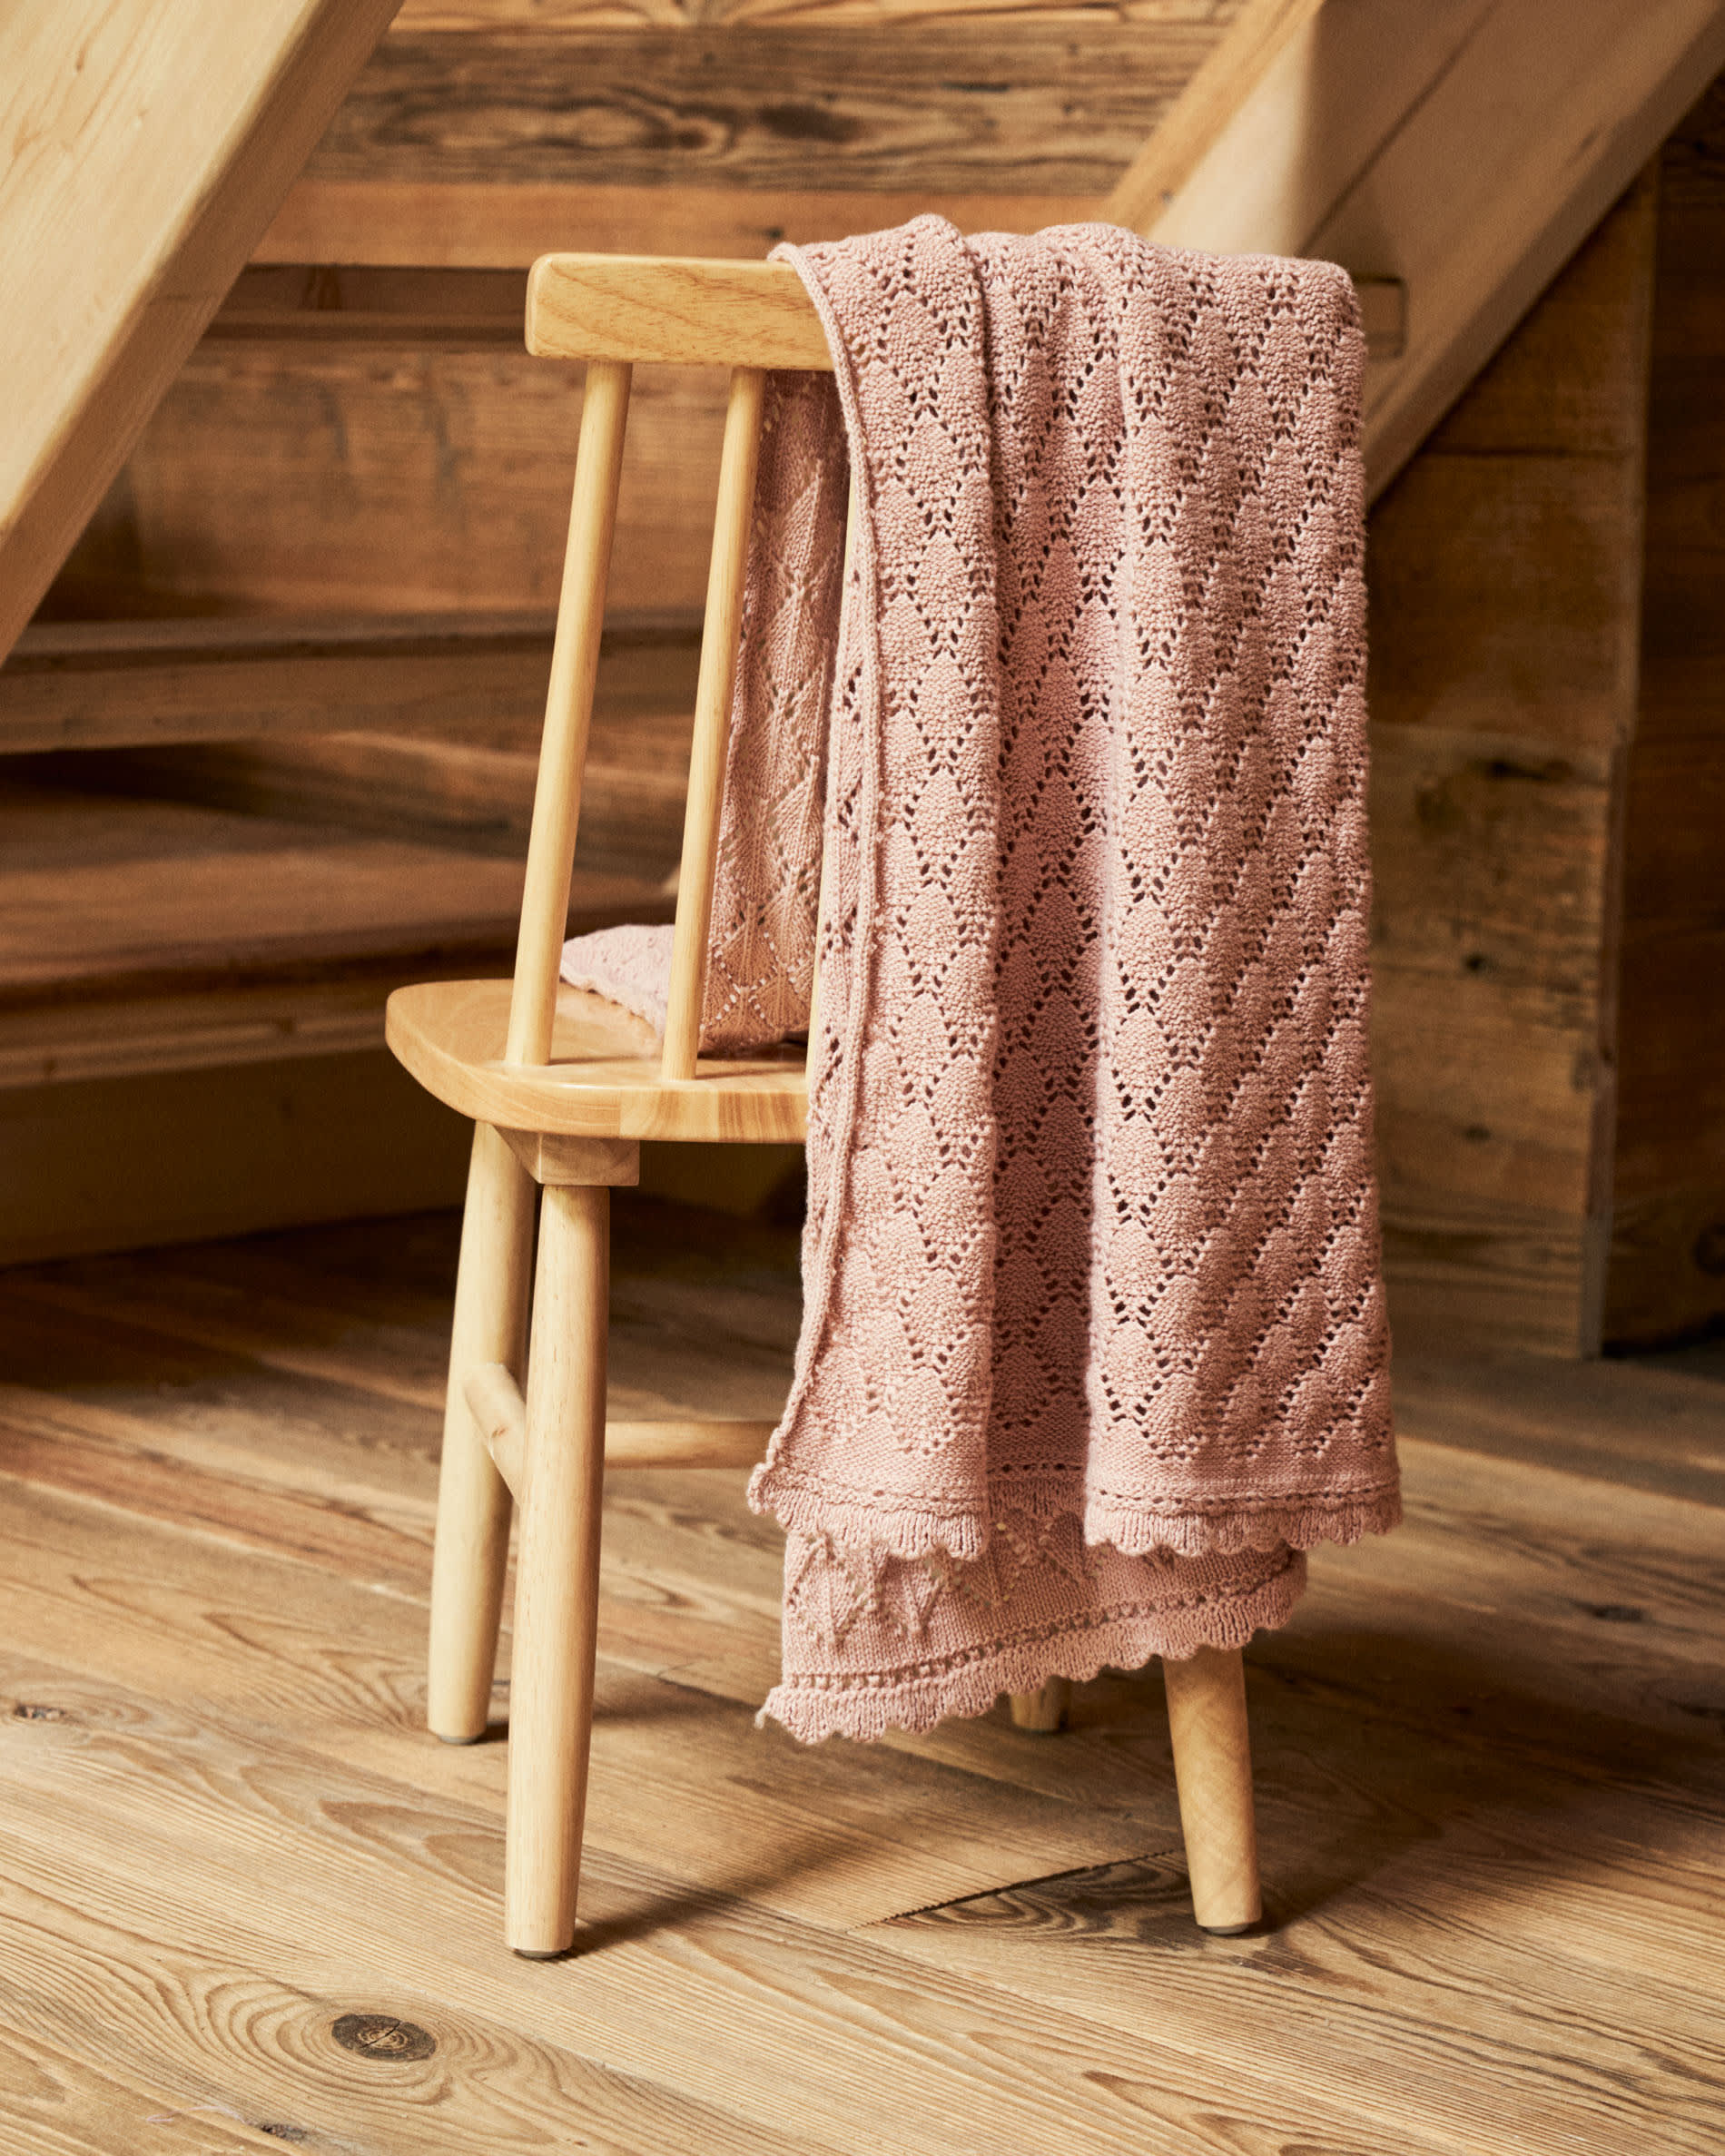 Ria pink knitted blanket, 70 x 100 cm